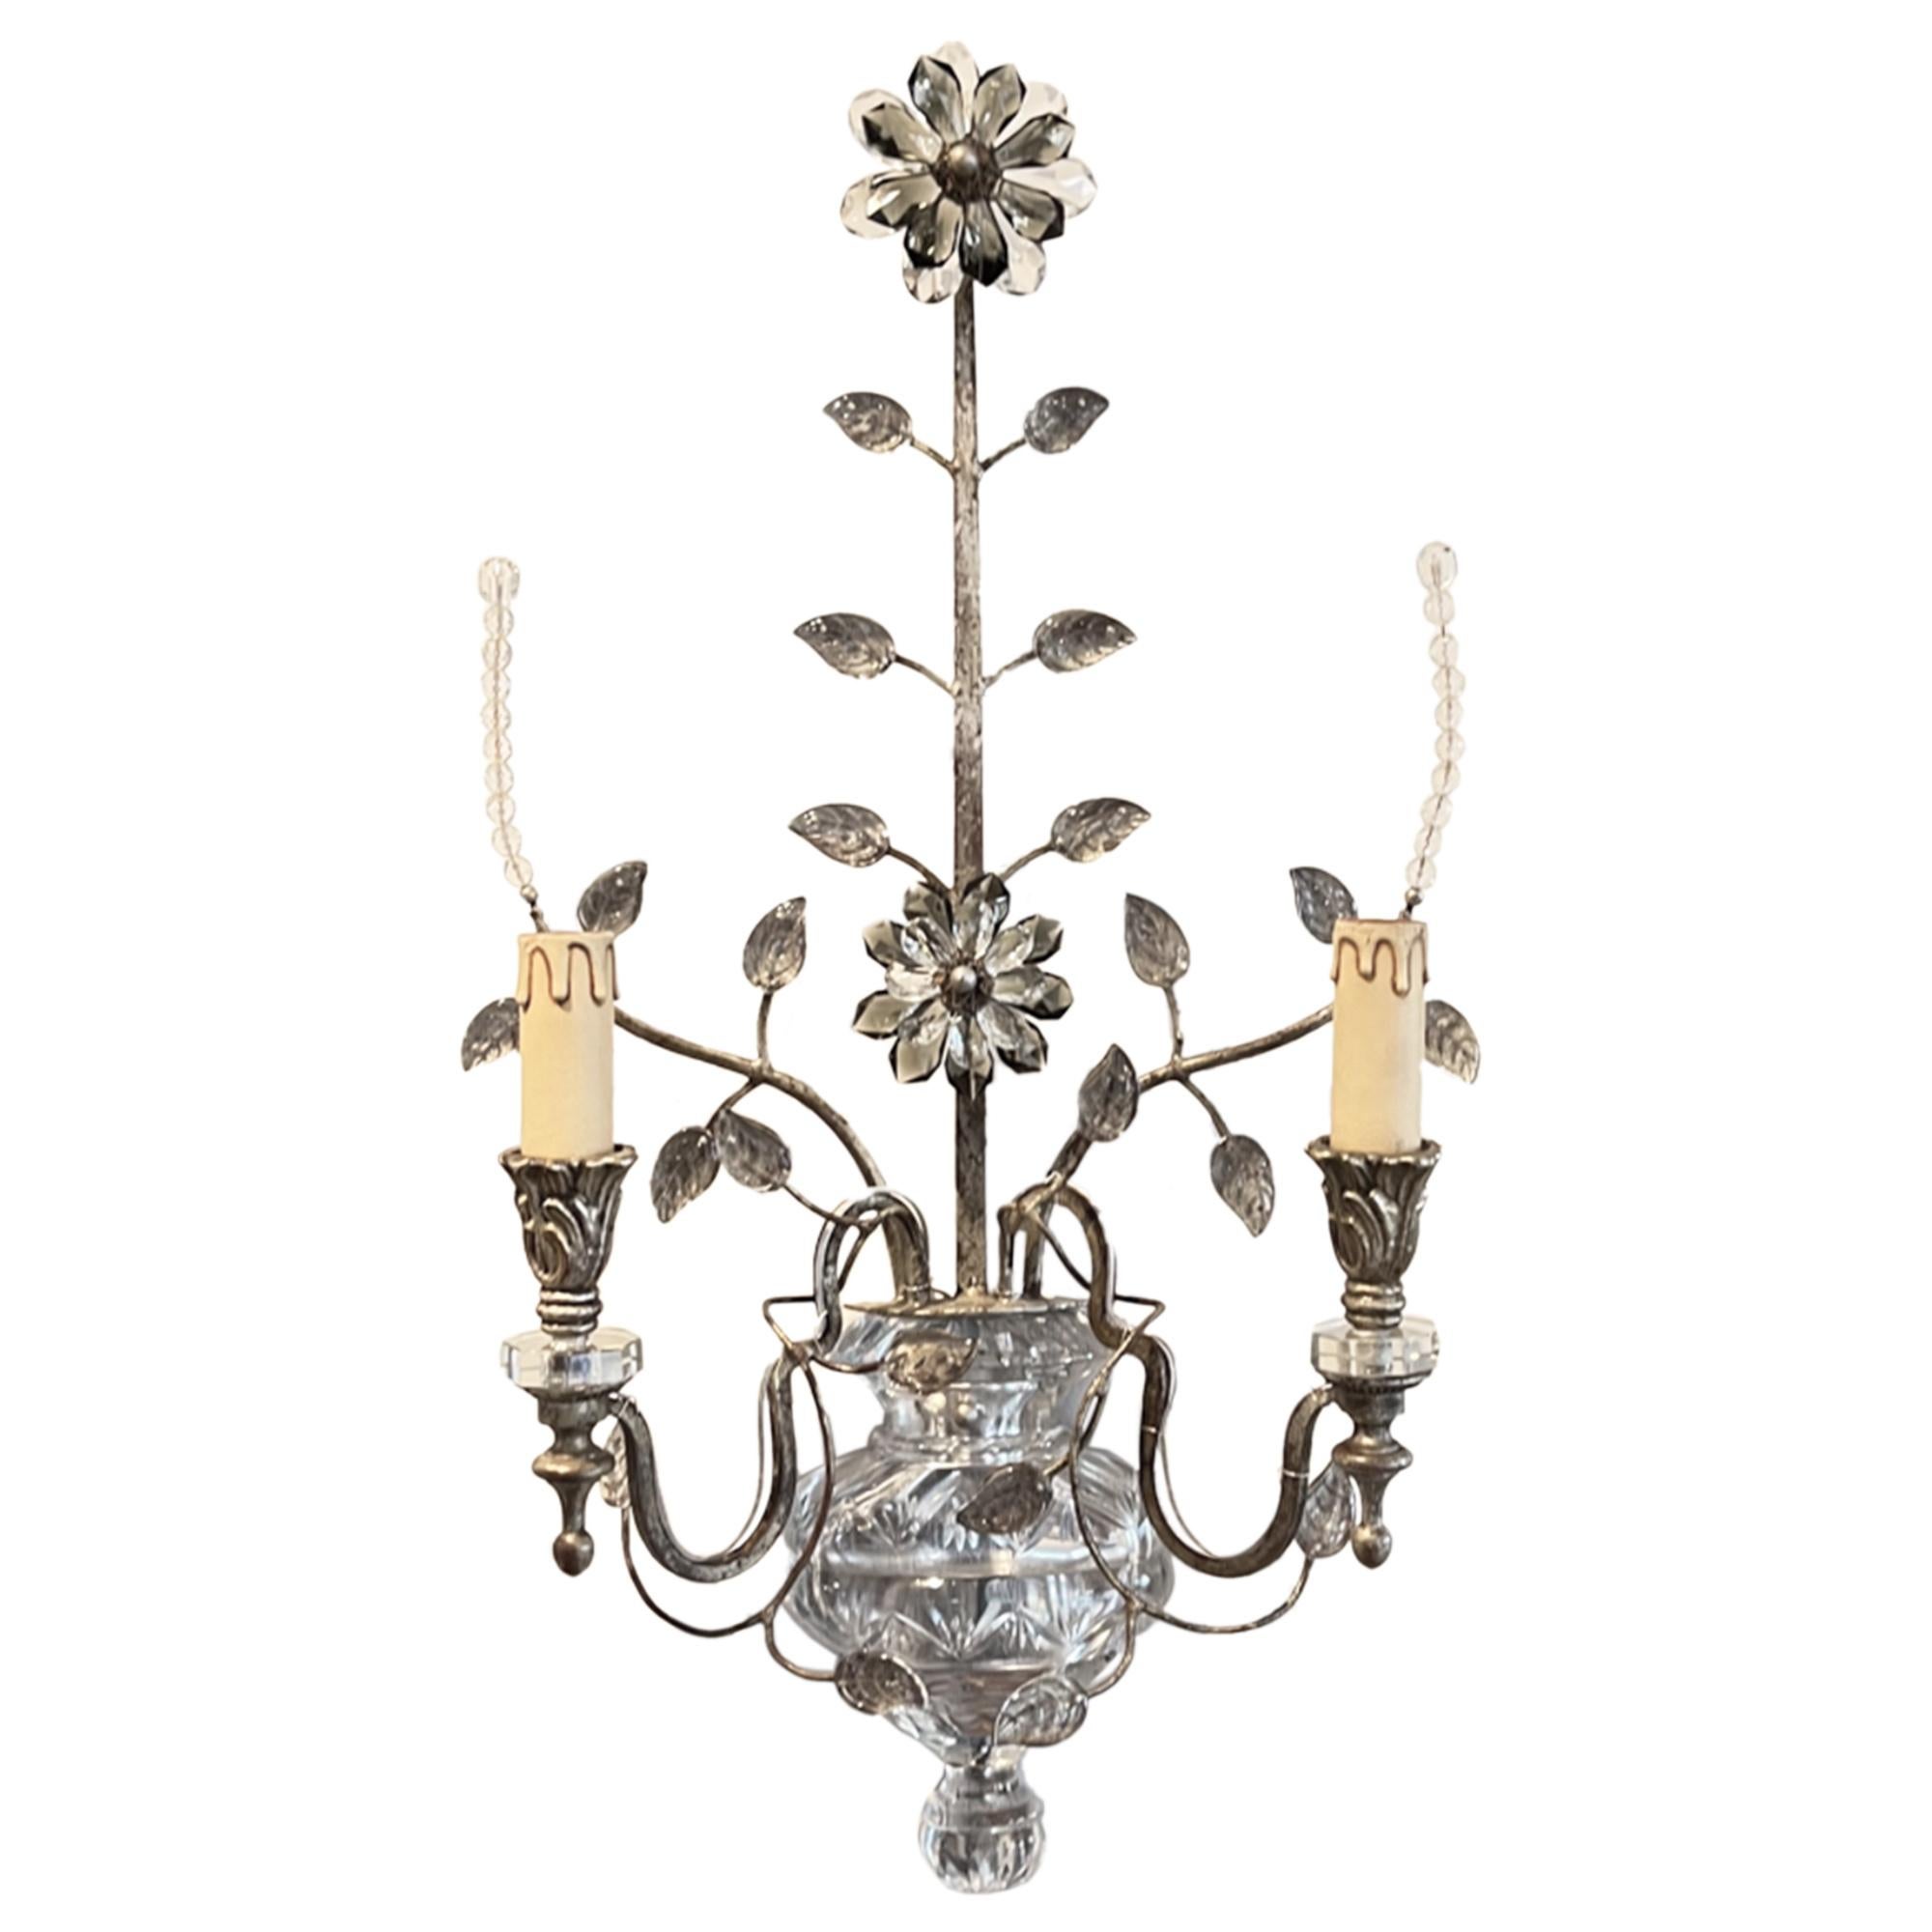 This large pair of decorative wall sconces were made by Banci, Firenze in the 1970s. 

Using gilt metal, glass, crystal and beads - the design is intricate and detailed and the result is stunning. Perfect for a living room, bedroom or hotel lobby.